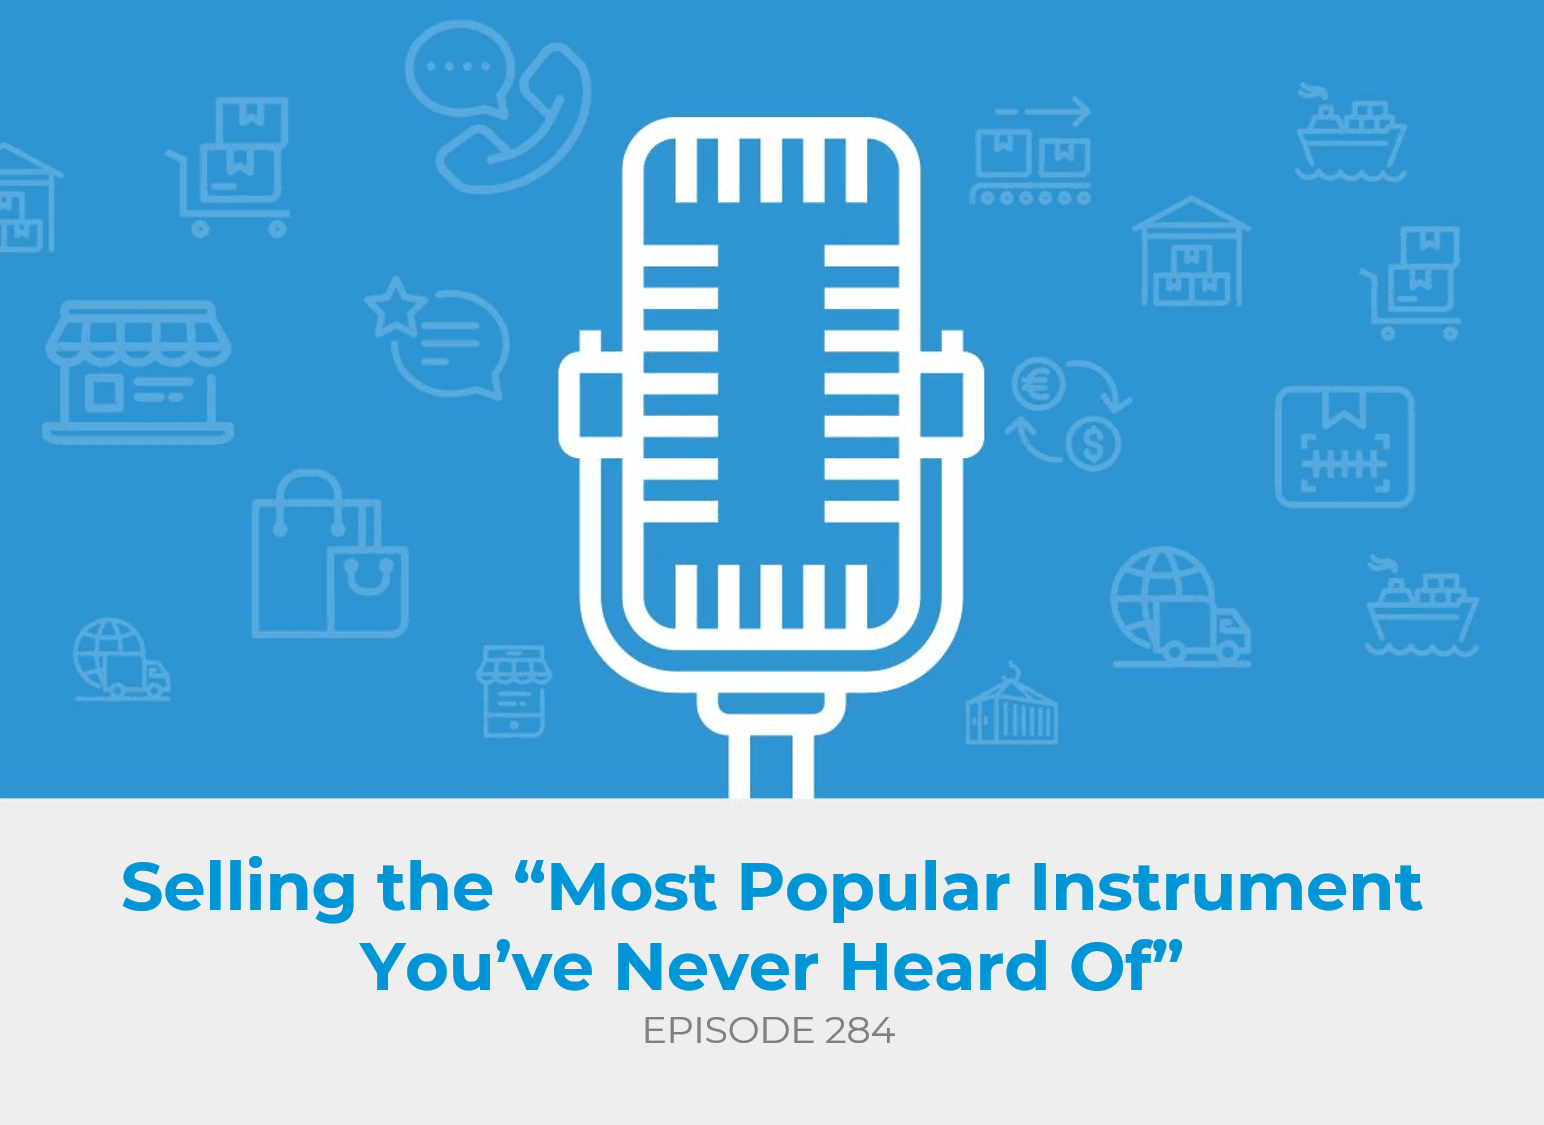 Selling the “Most Popular Instrument You’ve Never Heard Of”